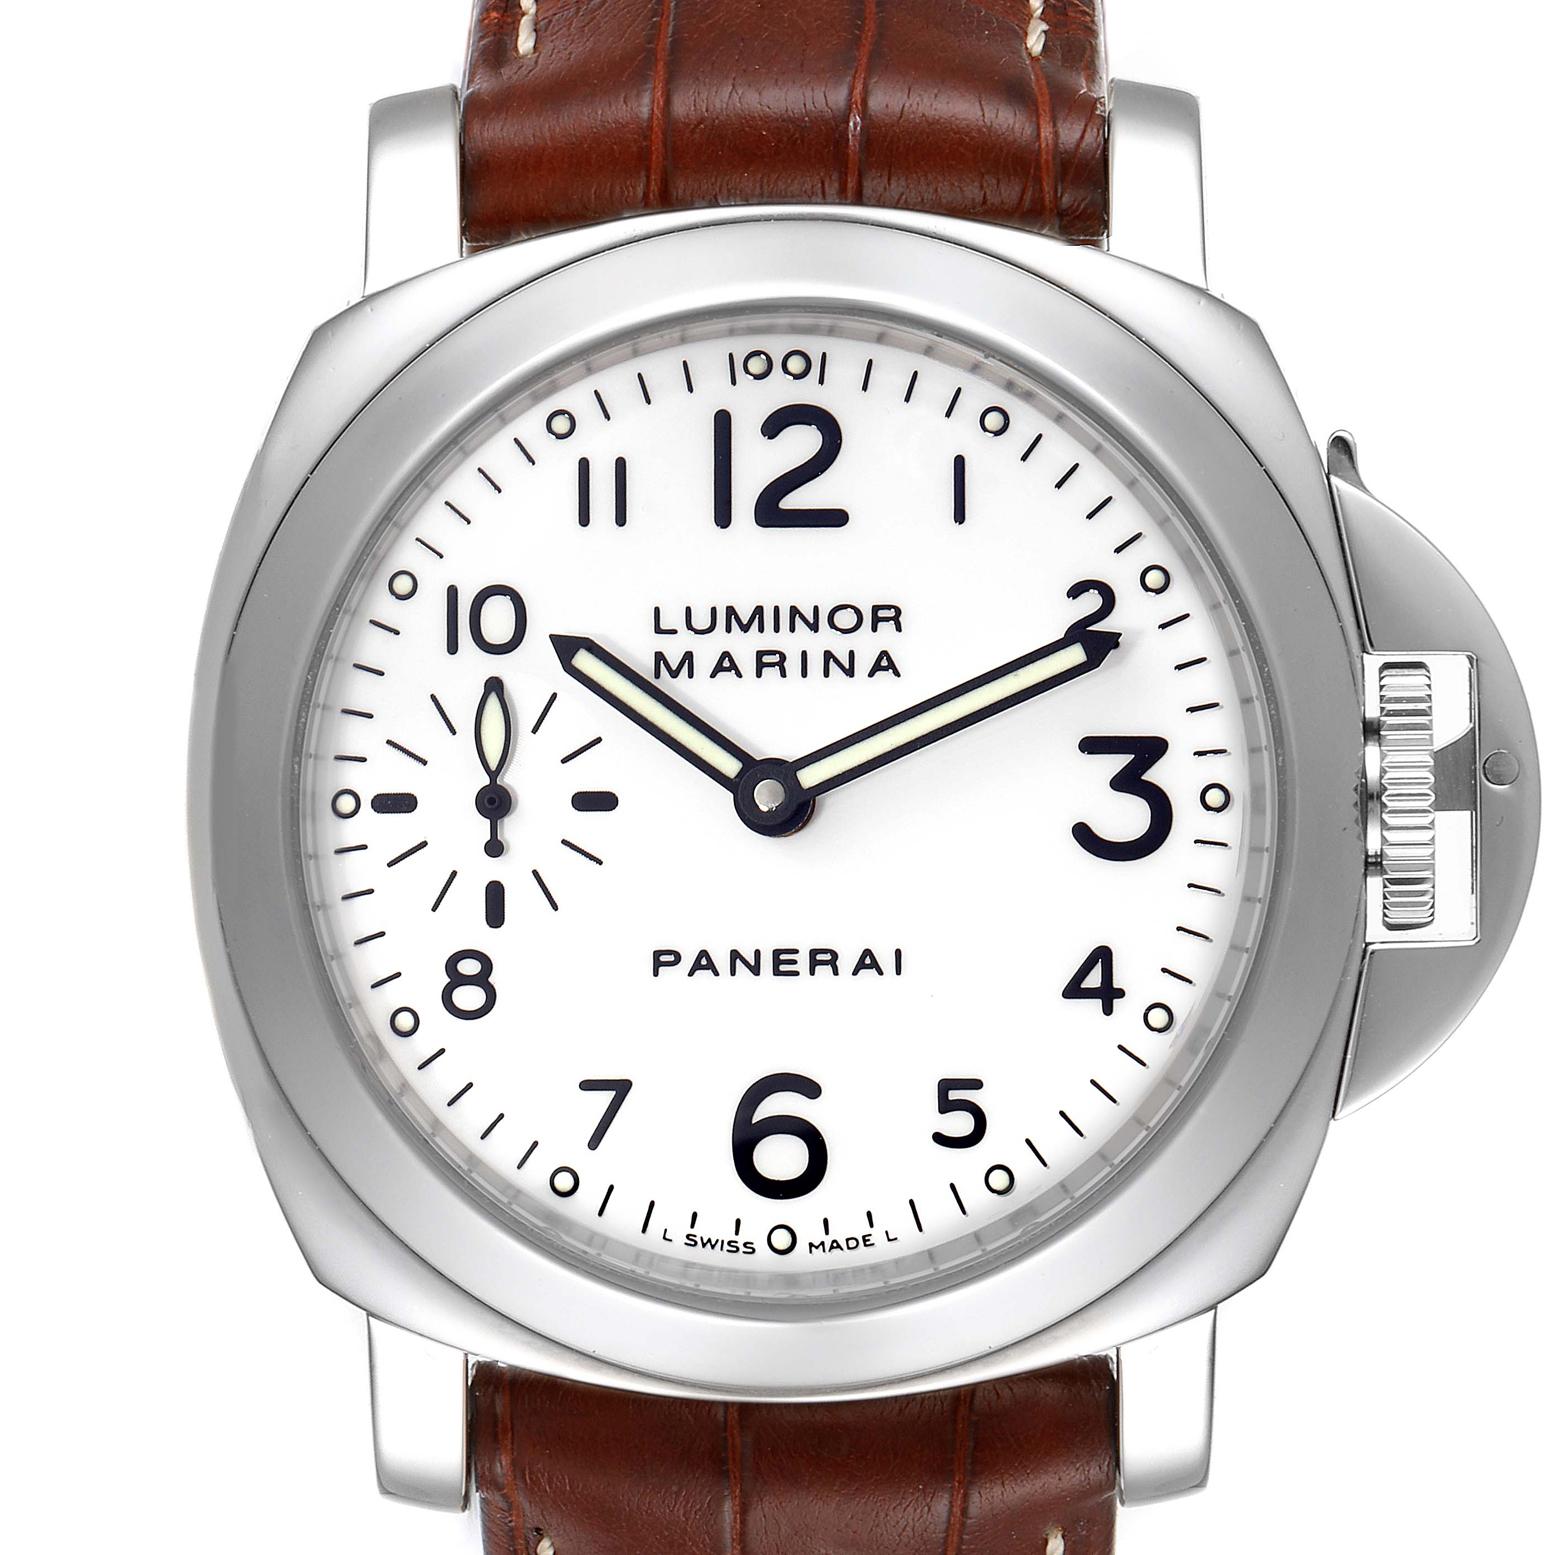 Panerai Luminor Marina 44mm White Dial Watch PAM00113 Box Papers. Manual-winding movement. Two part cushion shaped stainless steel case 44 mm in diameter. Panerai patented crown protector. Polished stainless steel sloped bezel. Scratch resistant